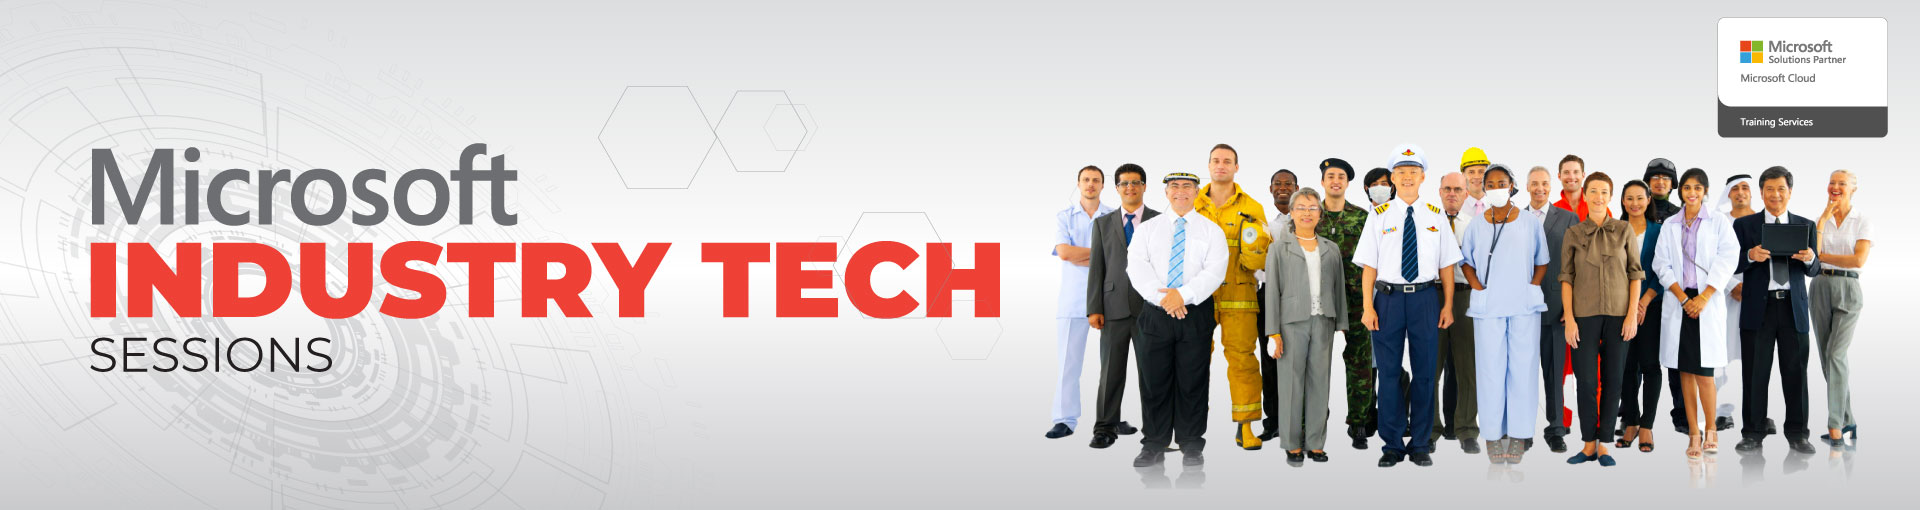 industry-tech-highlight-page-banner-10